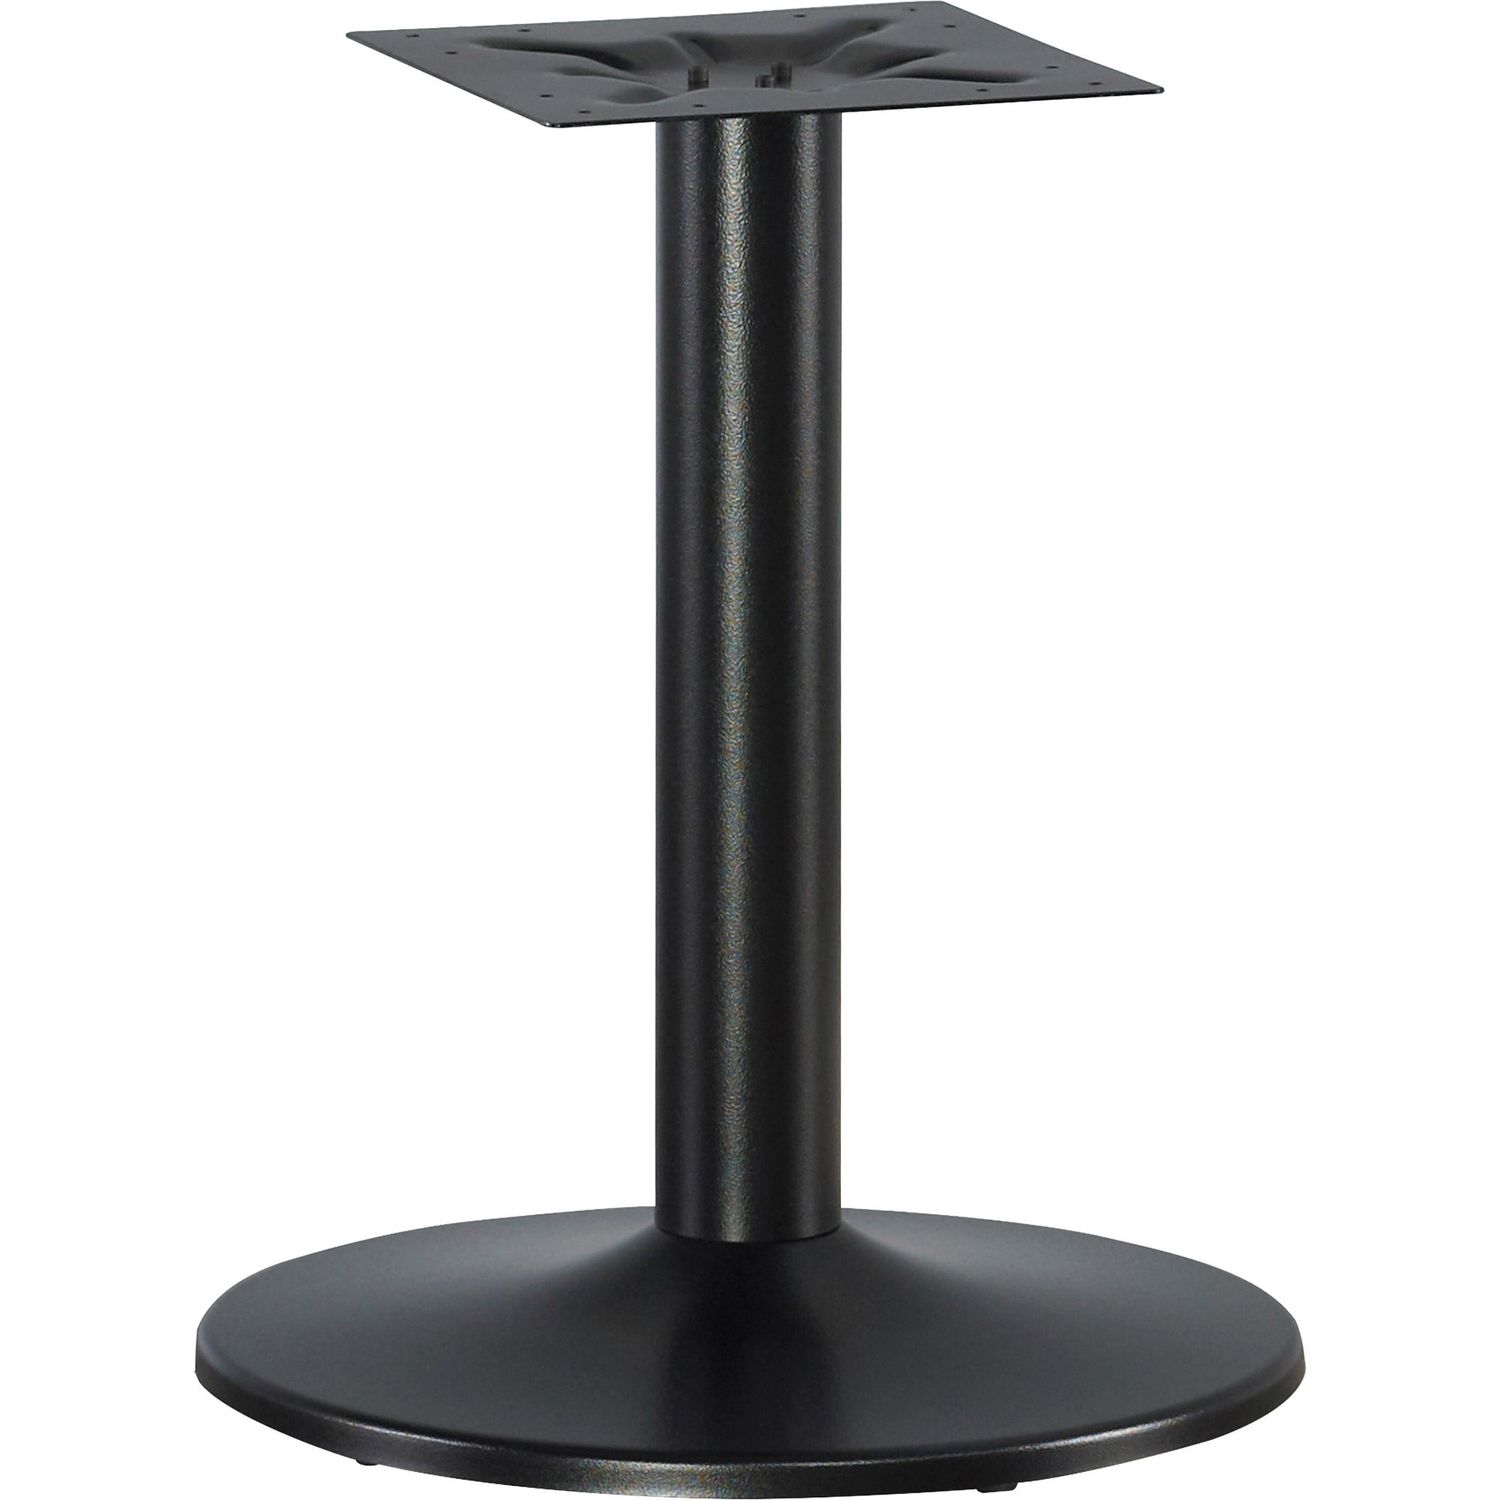 Essentials Conference Table Base Round Base, 28.50" Height x 23.63" Width x 23.63" Depth, Assembly Required, Black